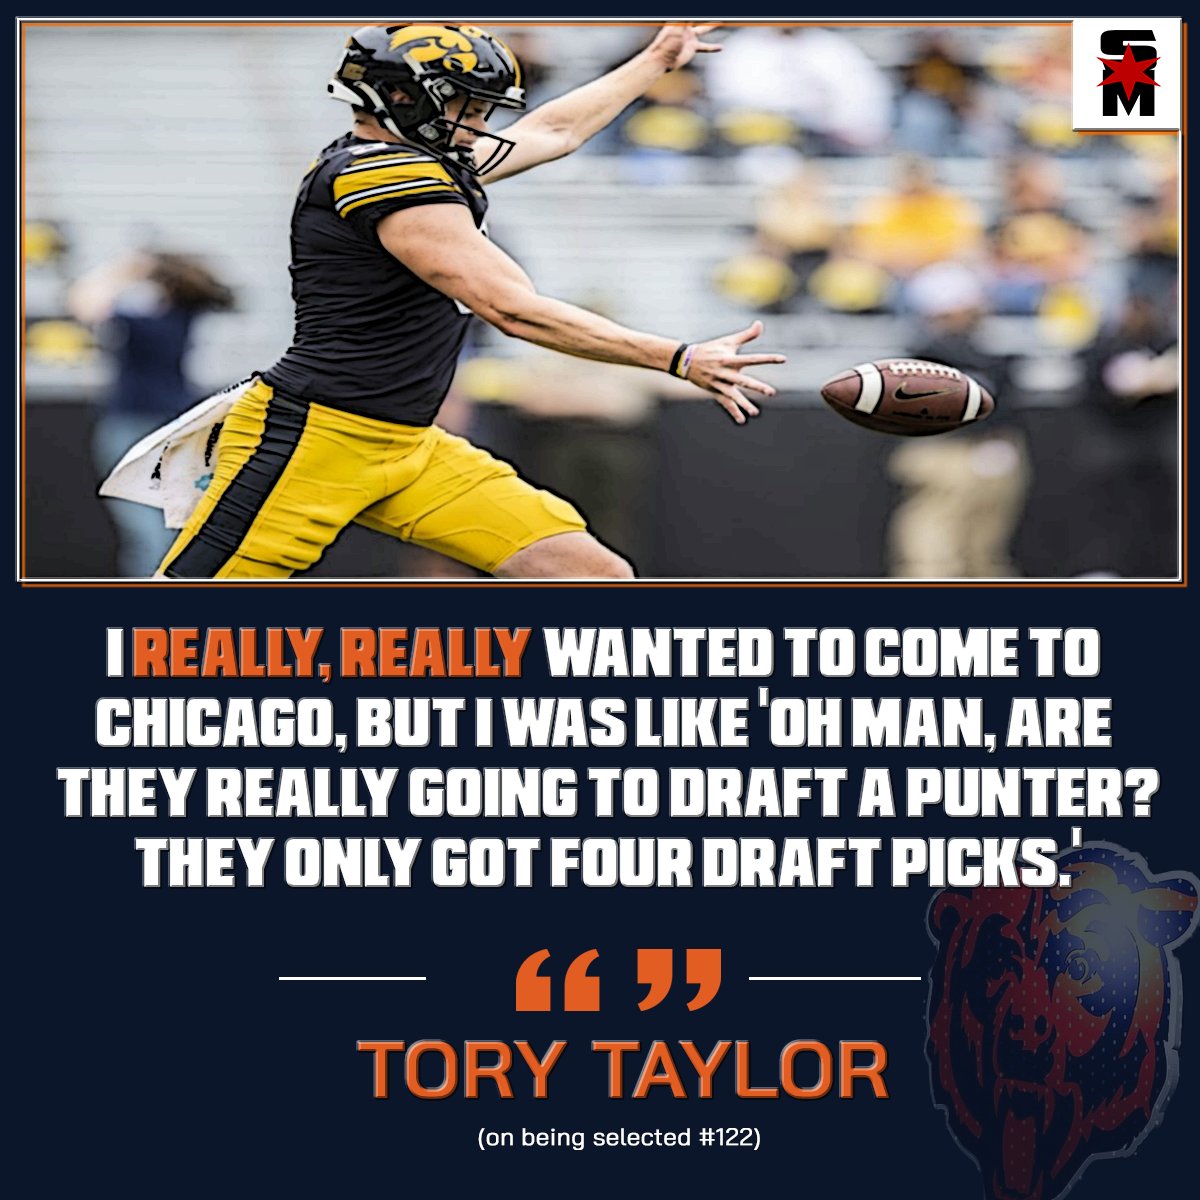 It looks like Tory Taylor was just as surprised as we were. Do you think the Bears made a mistake with this pick?